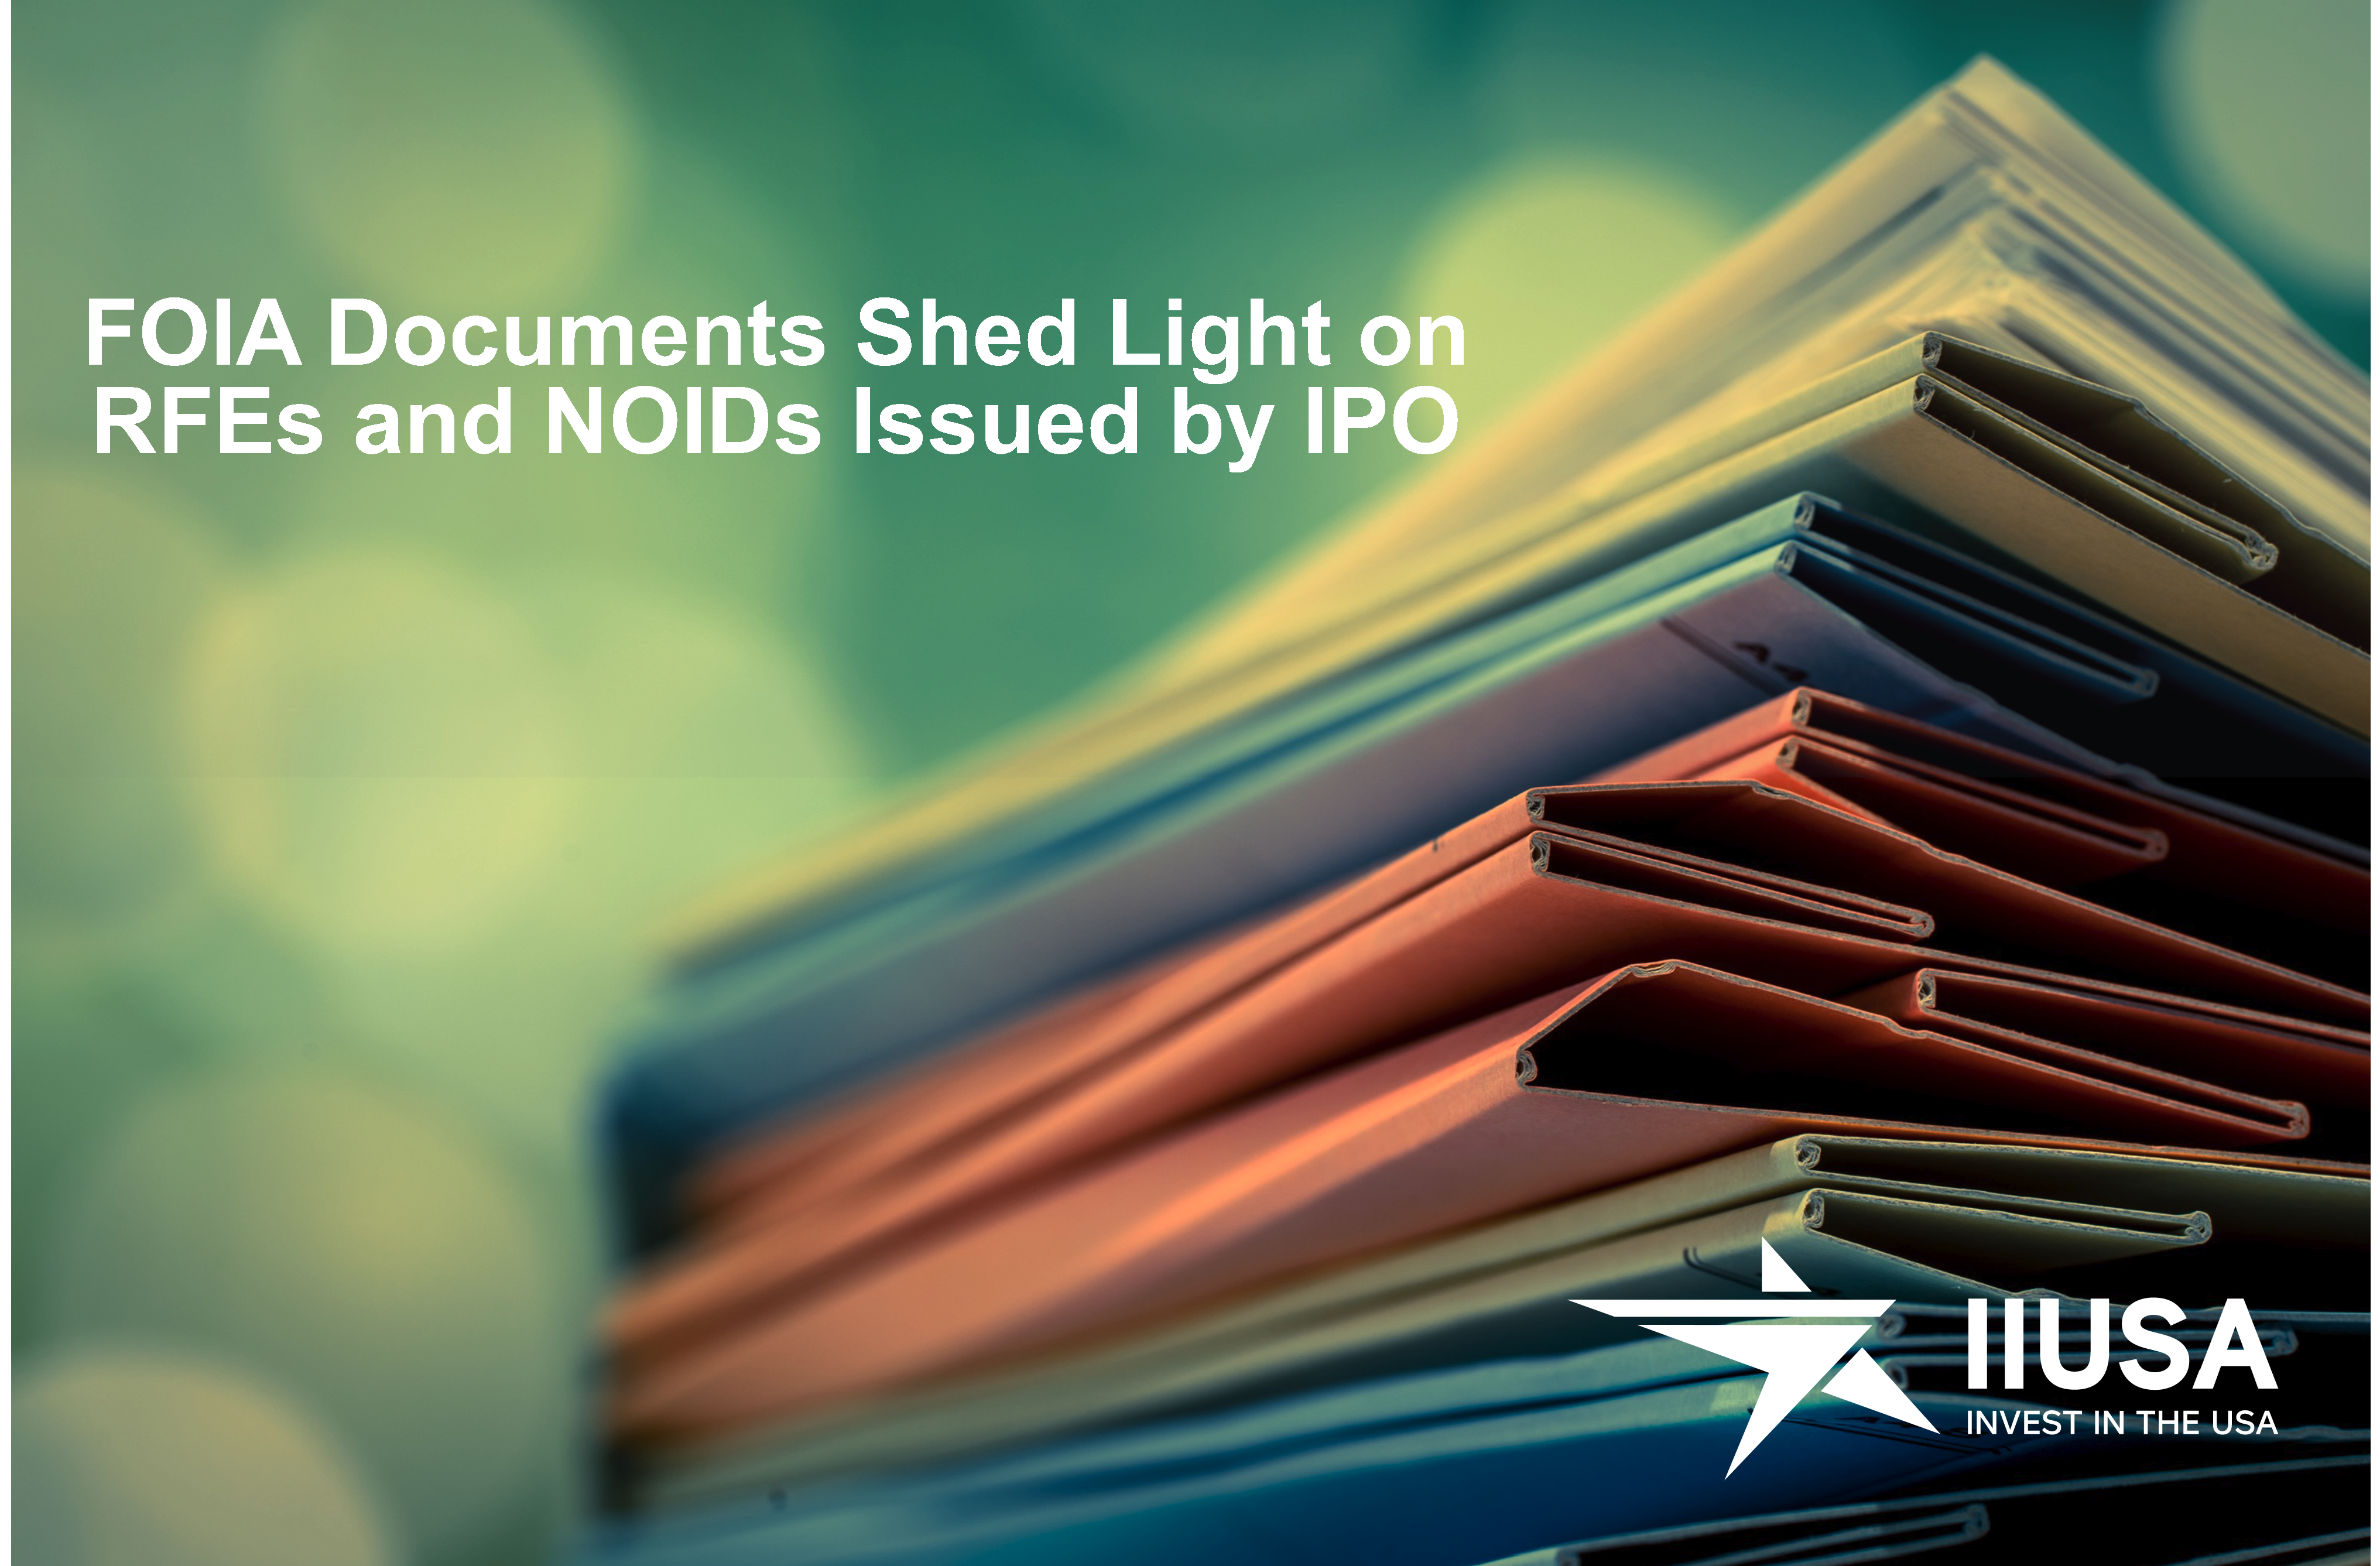 FOIA Documents Shed Light on RFEs and NOIDs Issued by IPO